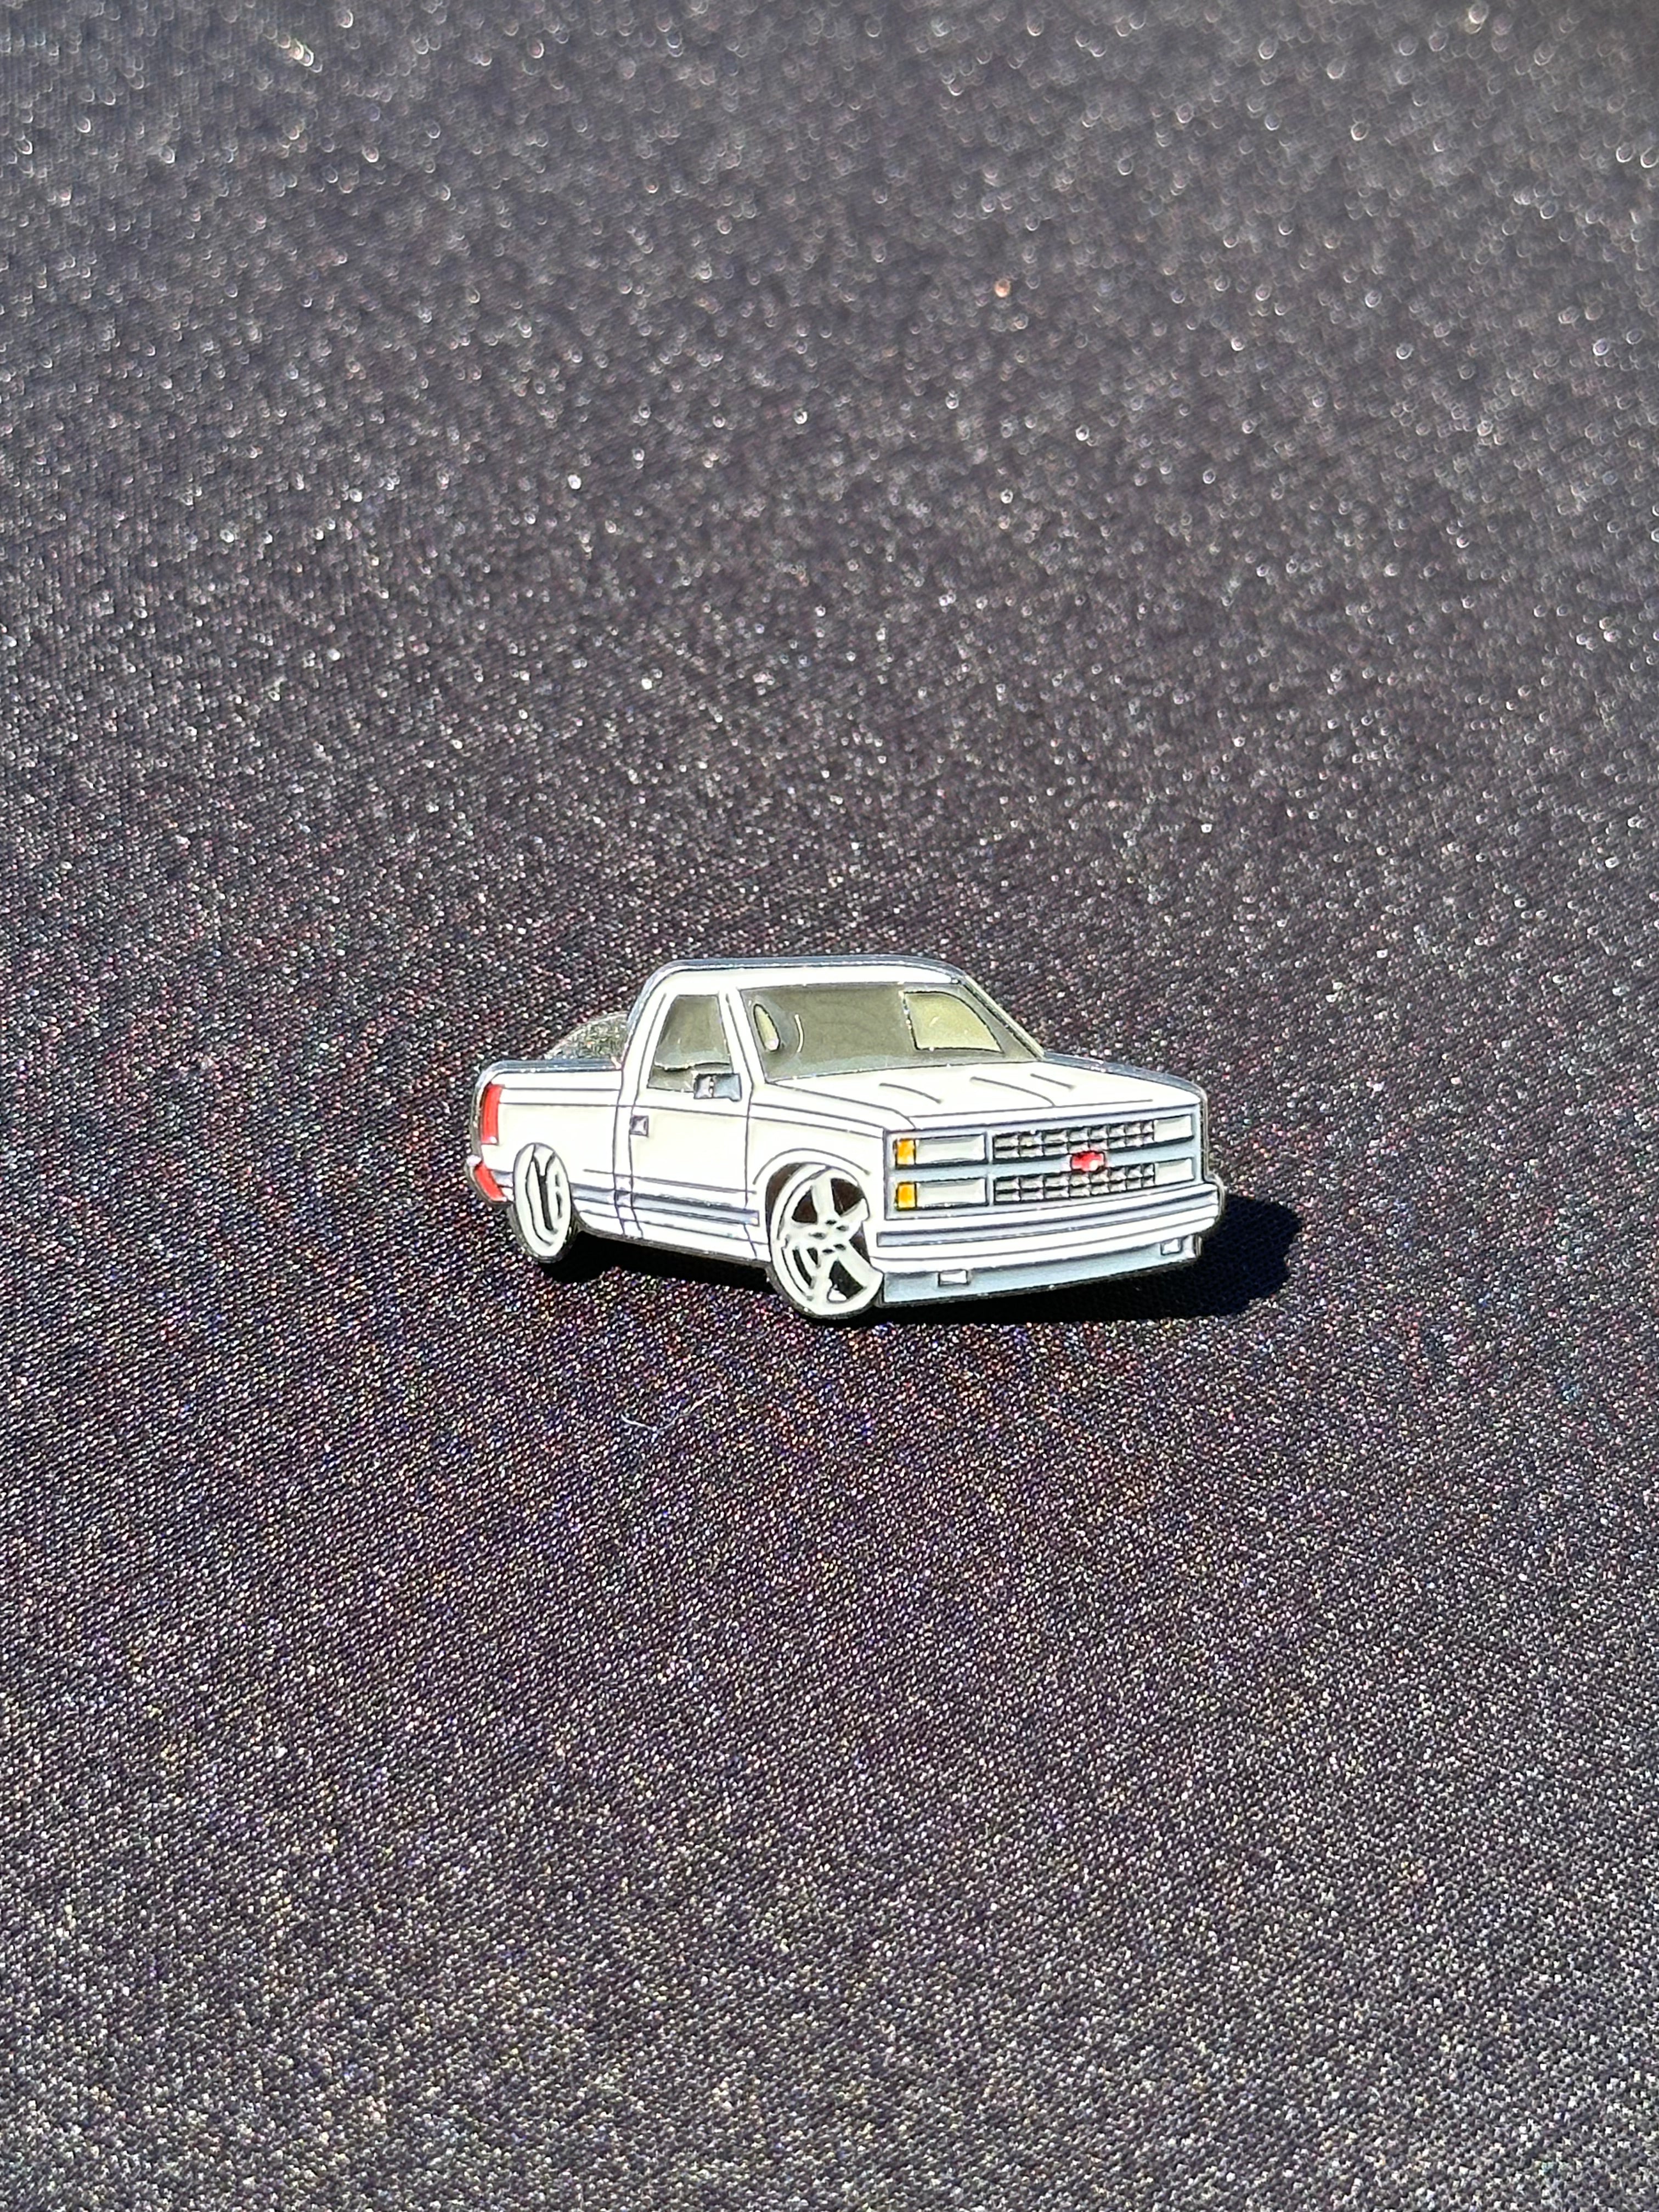 *NEW WHITE "PICK UP TRUCK" EXCLUSIVE PIN VERY LIMITED